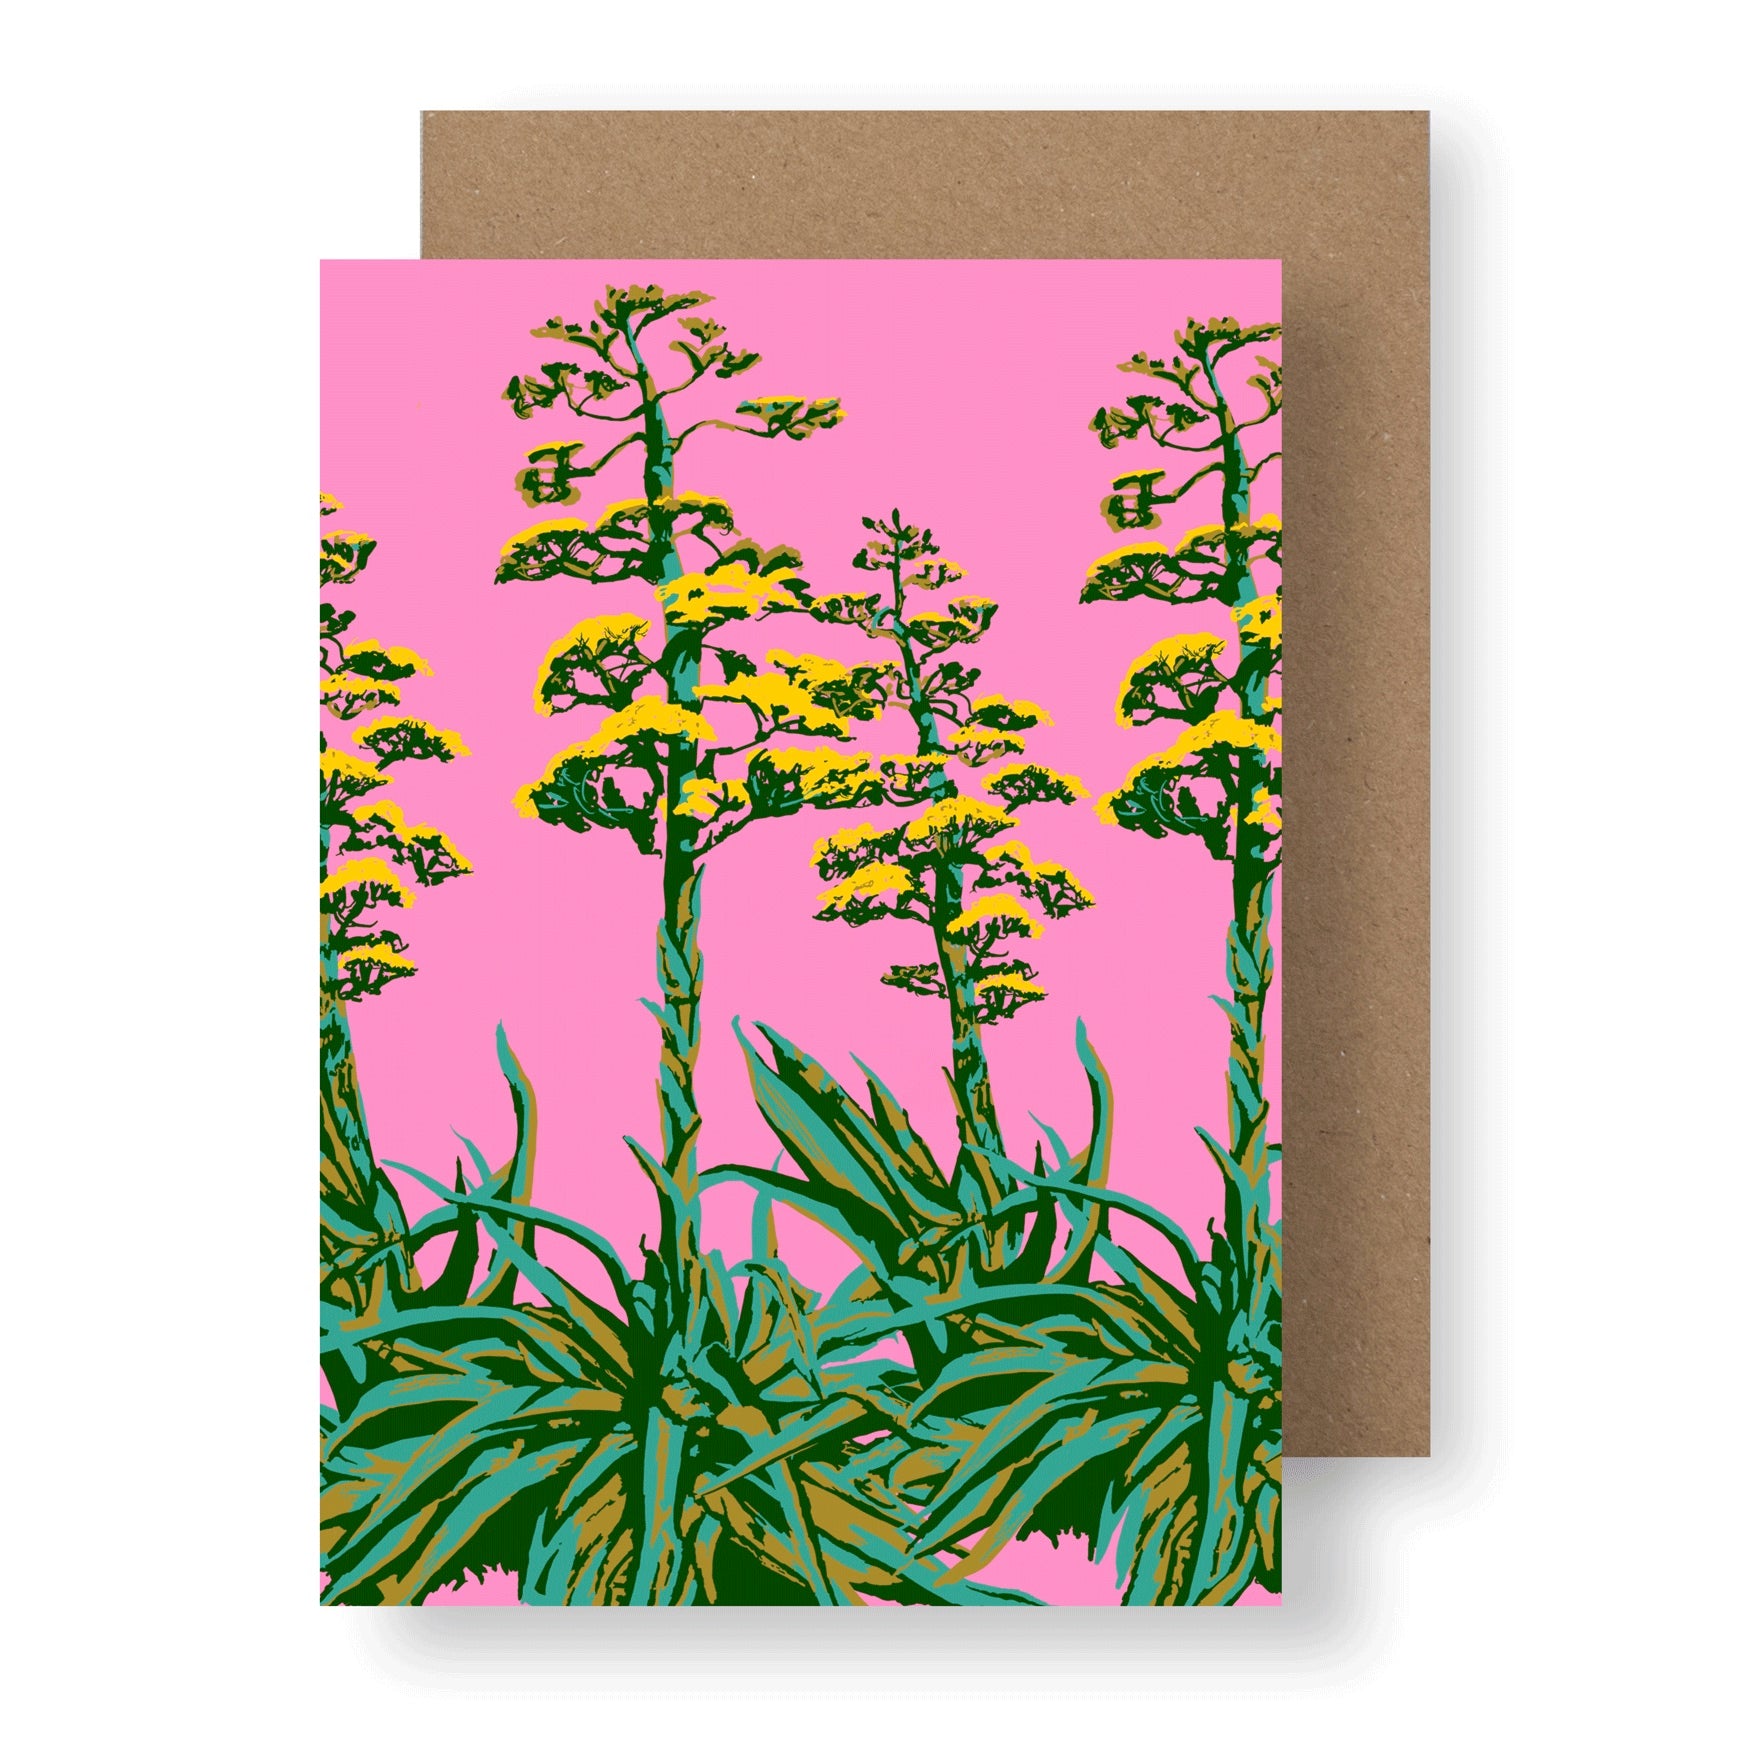 Colouful floral card in pink green and yellow